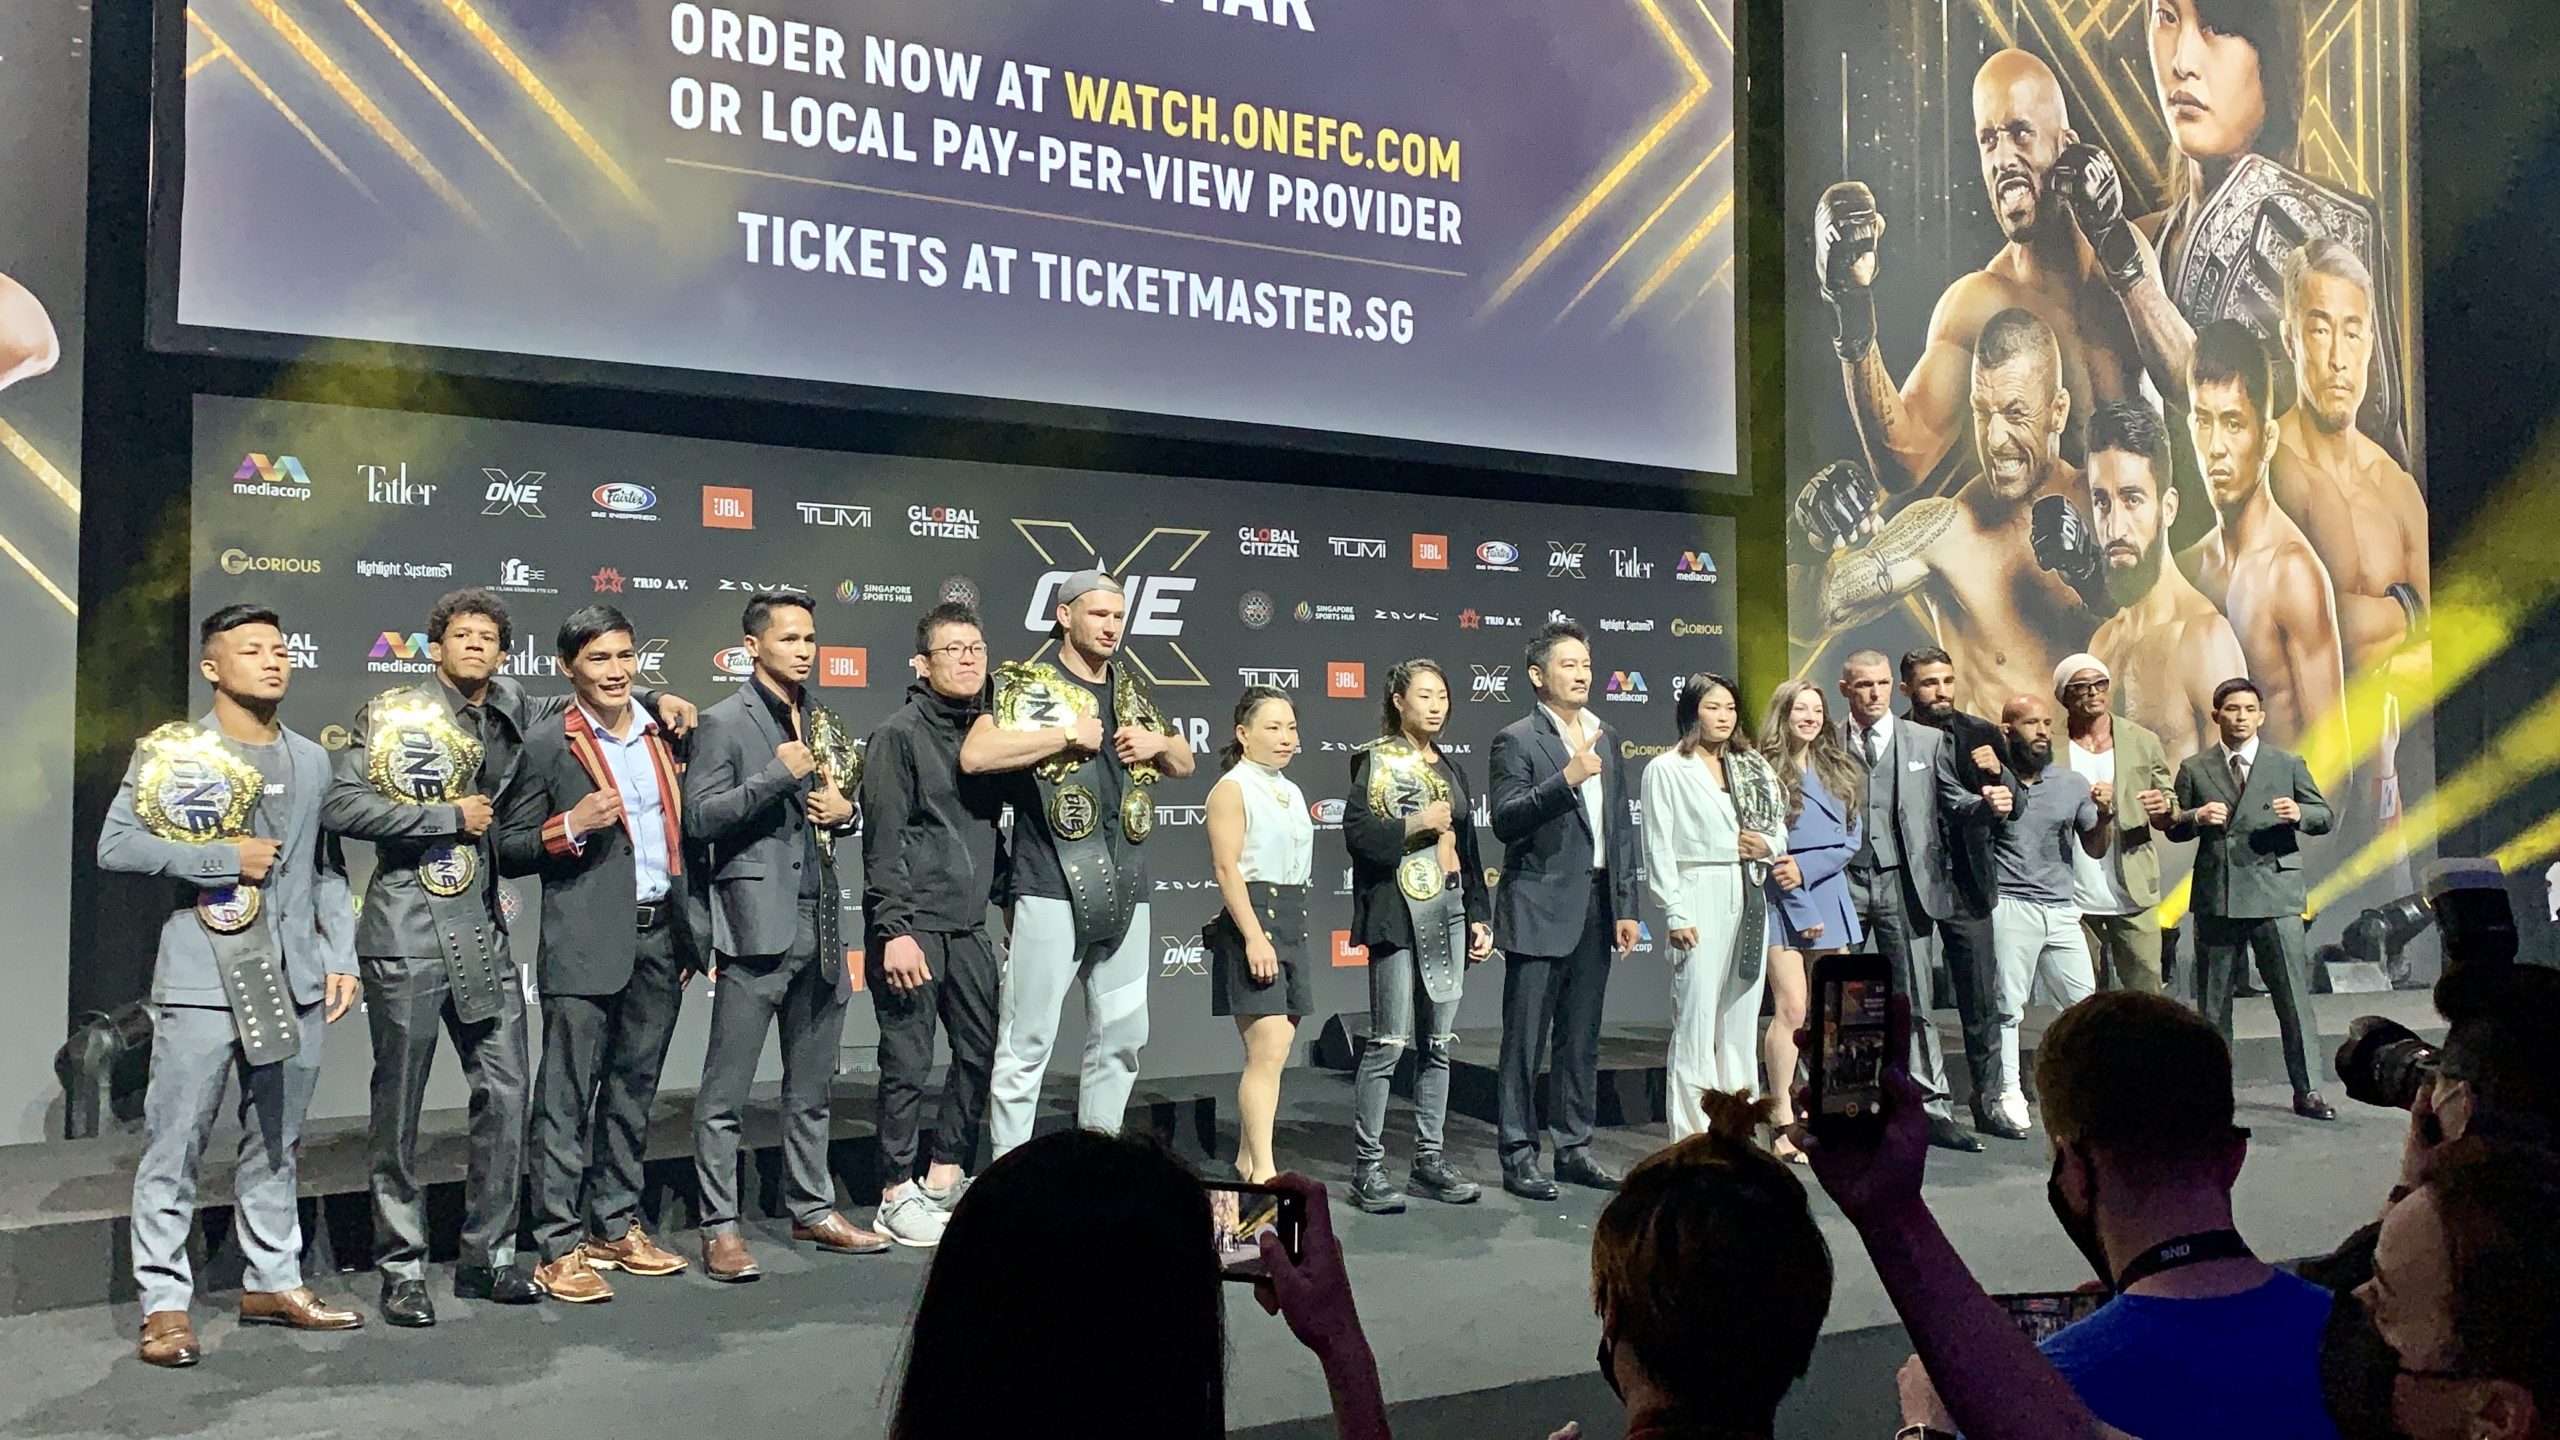 Fighters along with ONE Championship founder Chatri Sityodtong during the ONE X press conference on Wednesday.